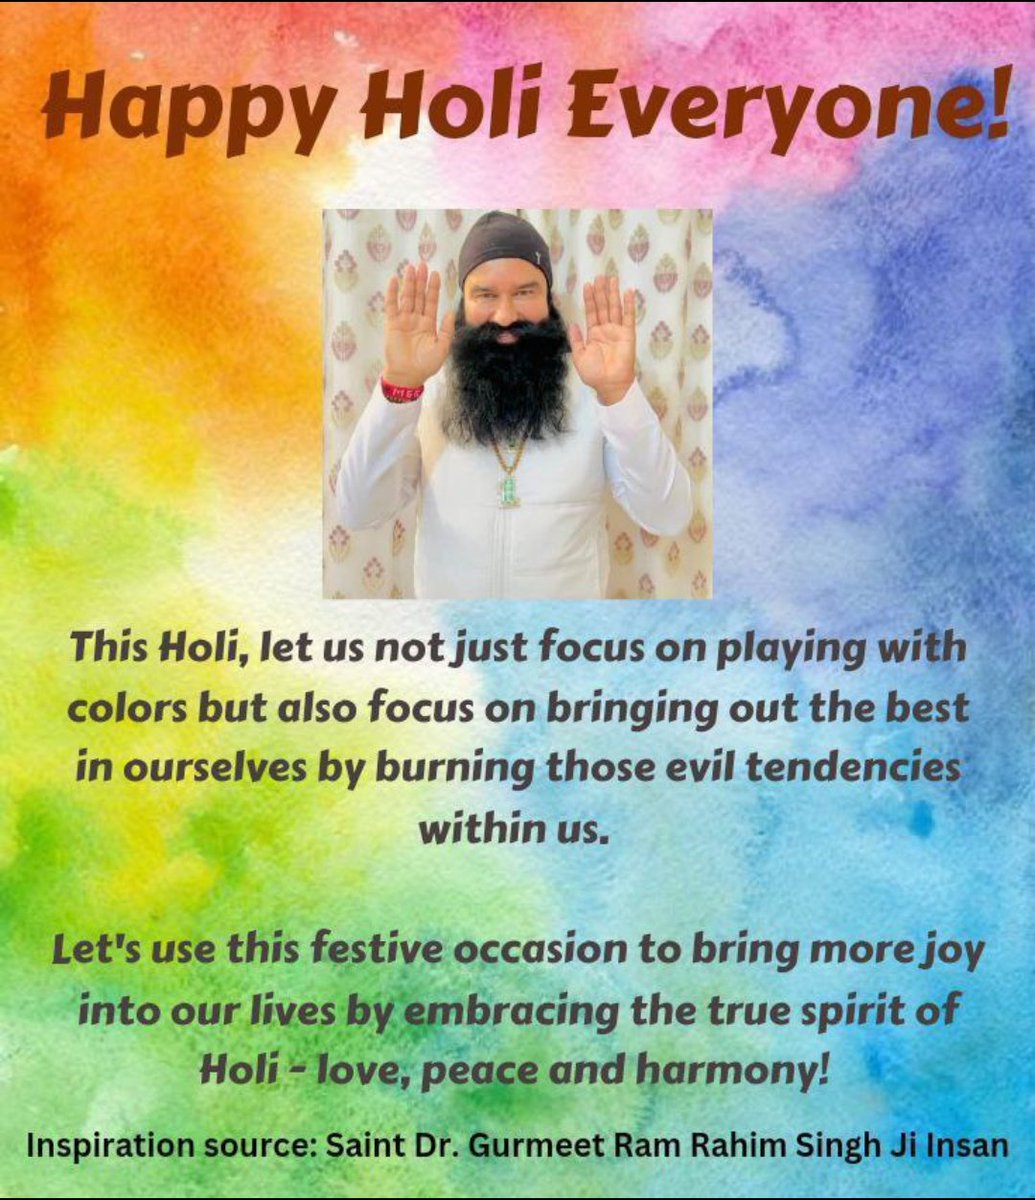 Saint Gurmeet Ram Rahim ji tells that every festival brings message to us, every festival is the epitome of truth’s victory over evil. So always get victory over your inner vices with inner power& peace.Use chemical free colors and spread happiness #ShareHappiness 
#HappyHoli